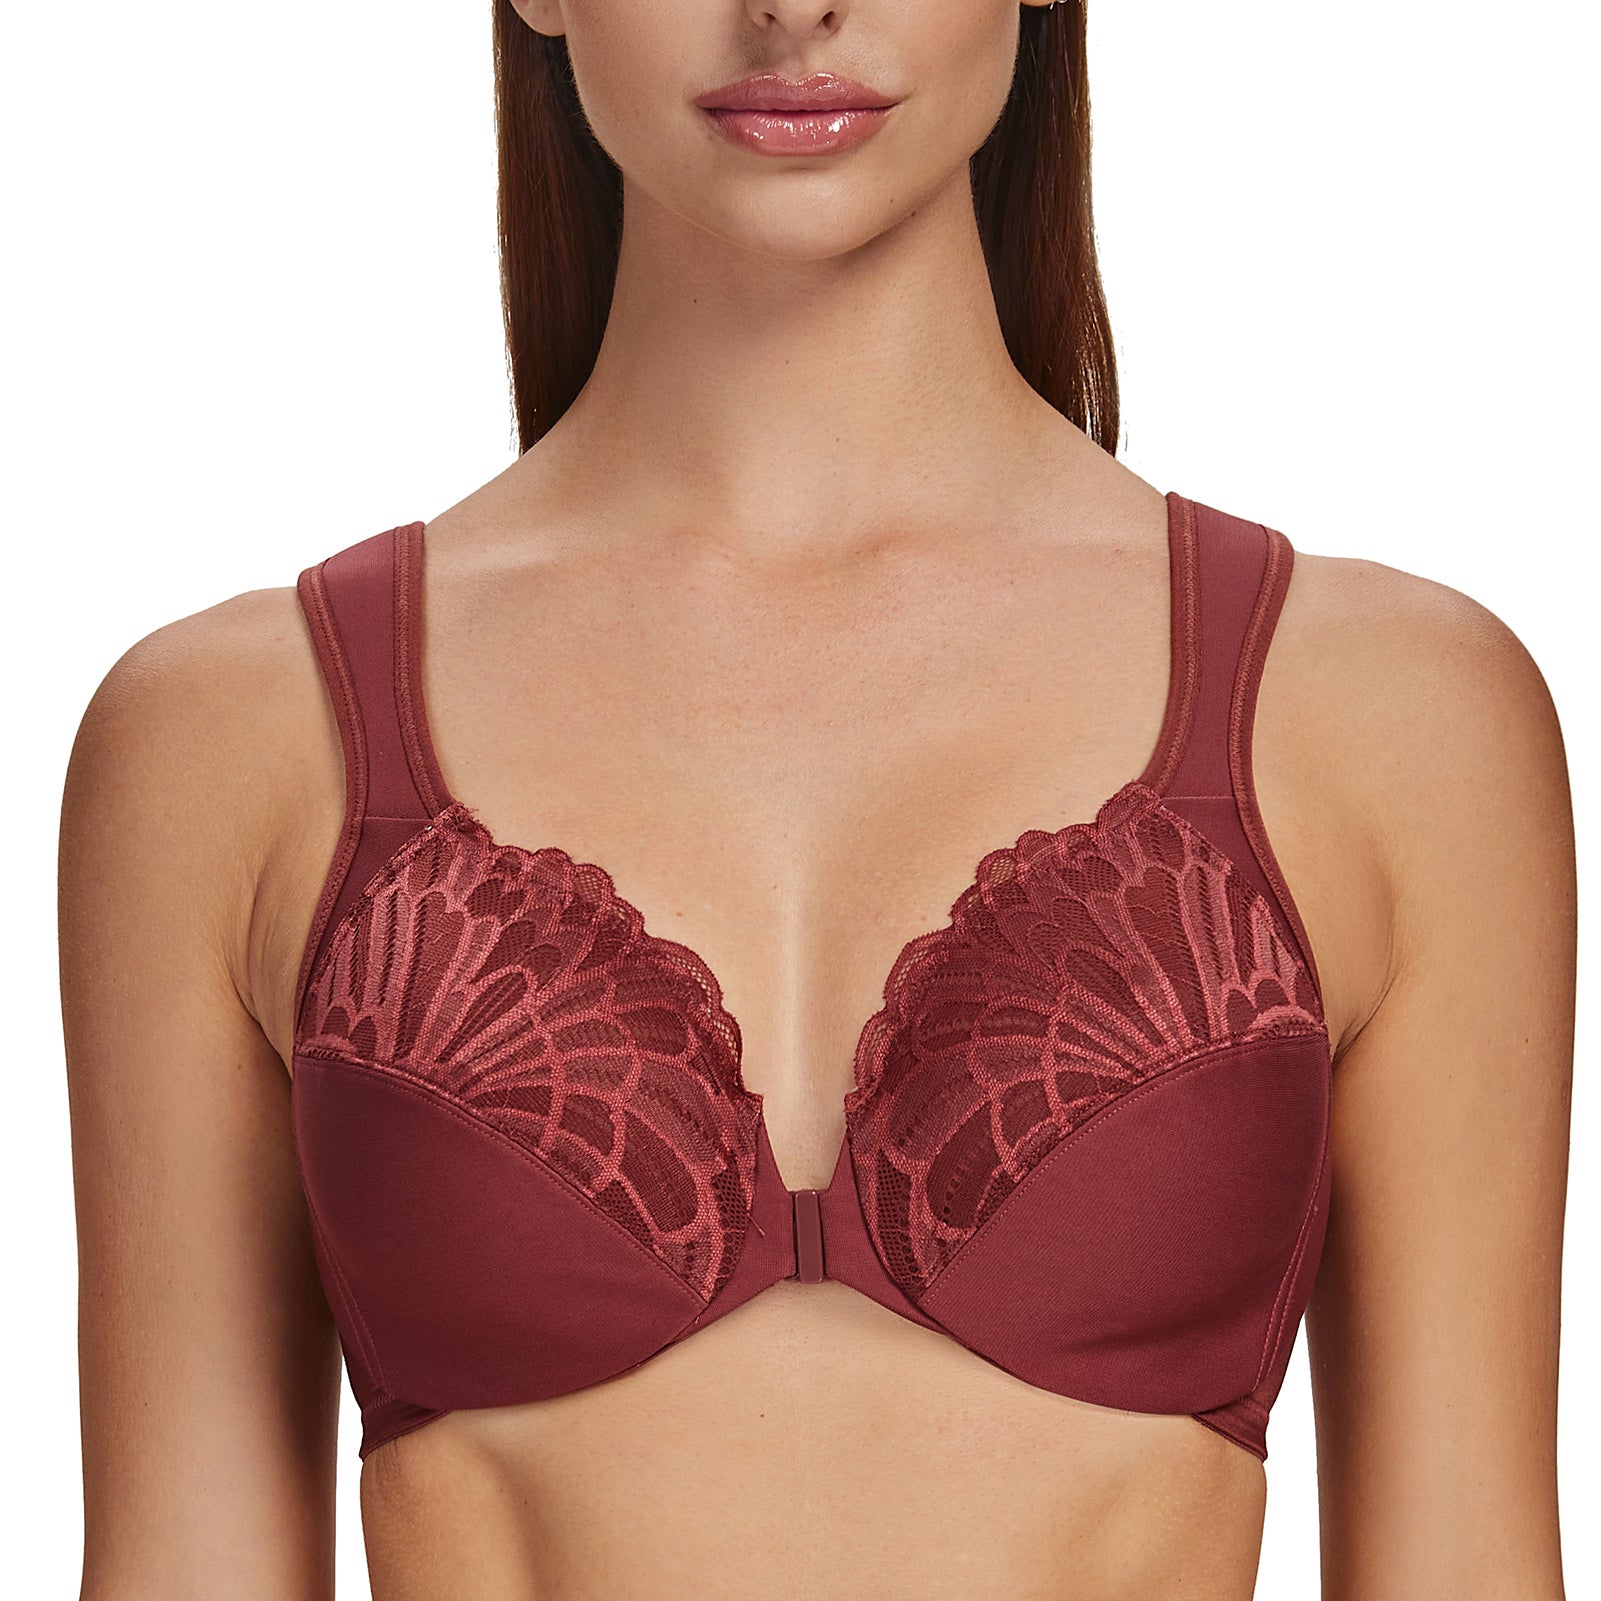 MELENECA Front Closure Bras for Women Plus Size Underwire Unlined Lace Cup  Cushion Strap